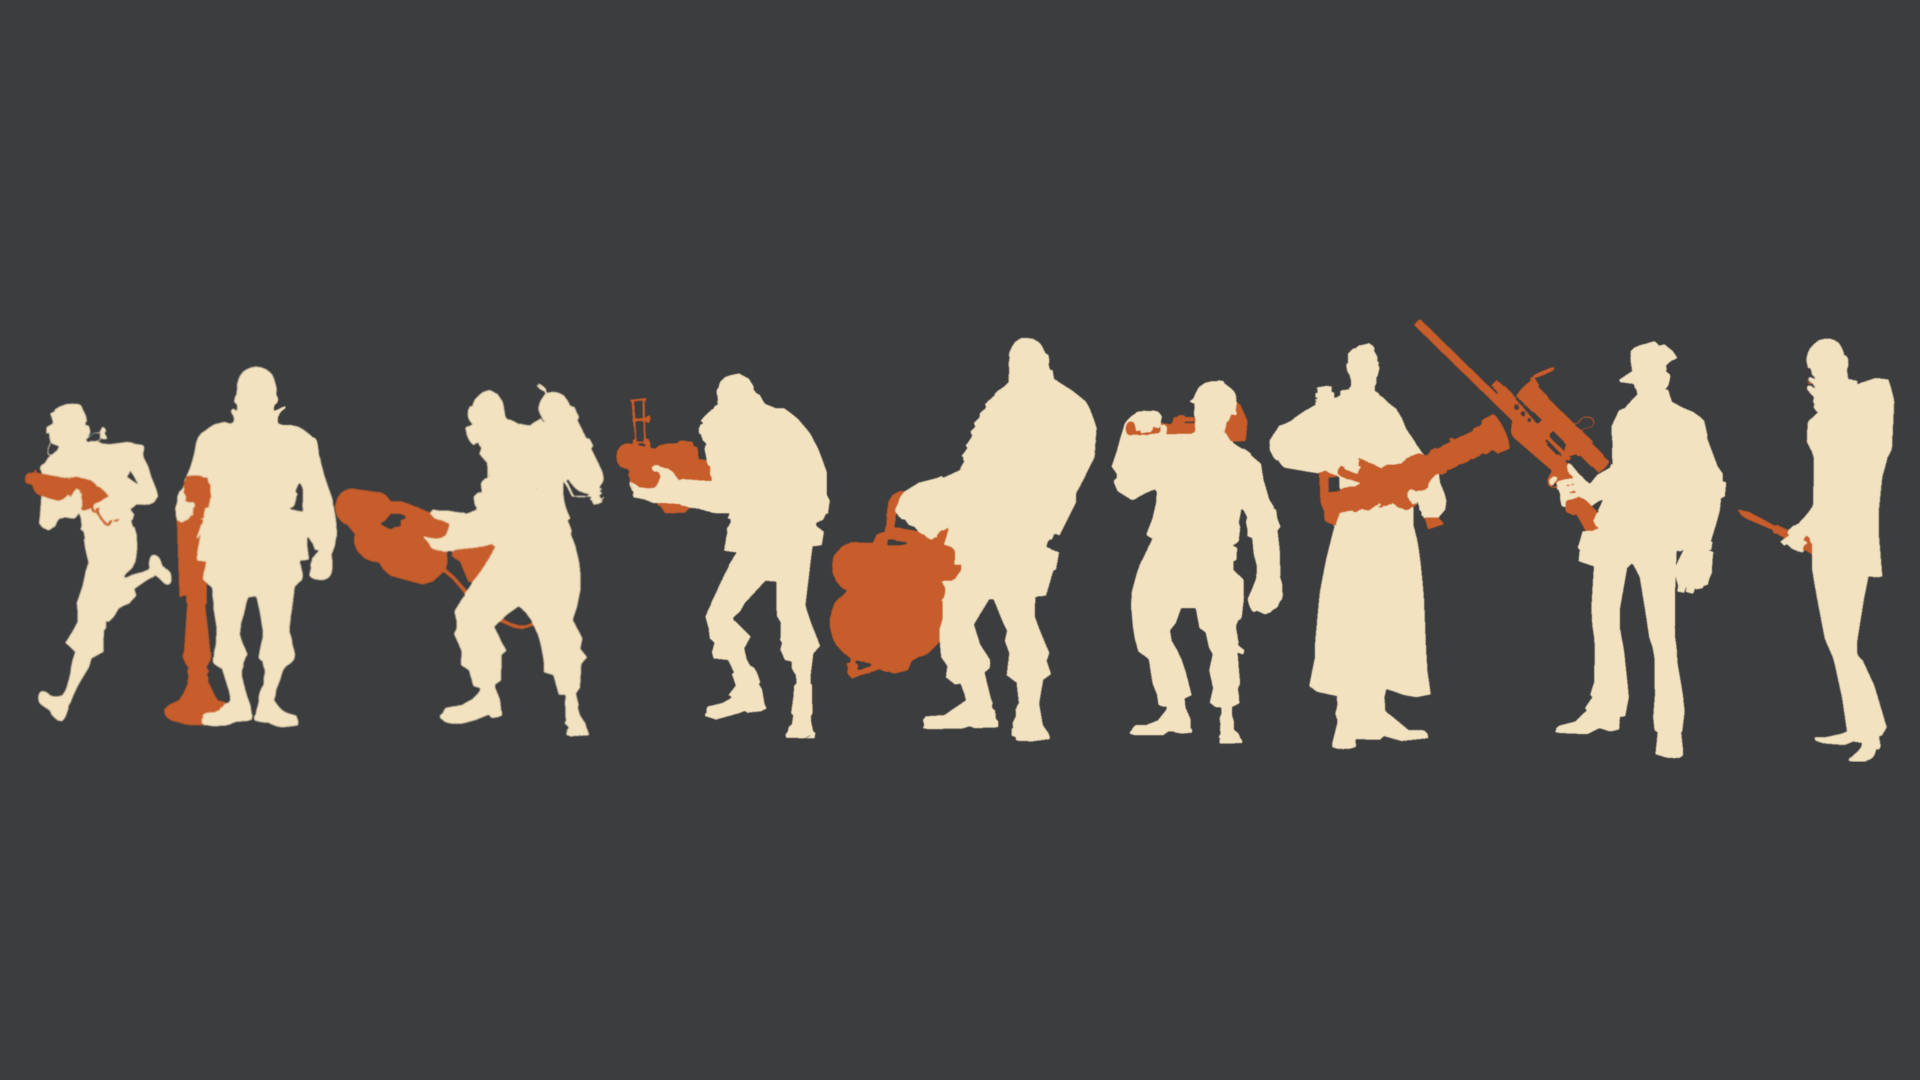 Team Fortress 2 Character Silhouette Background